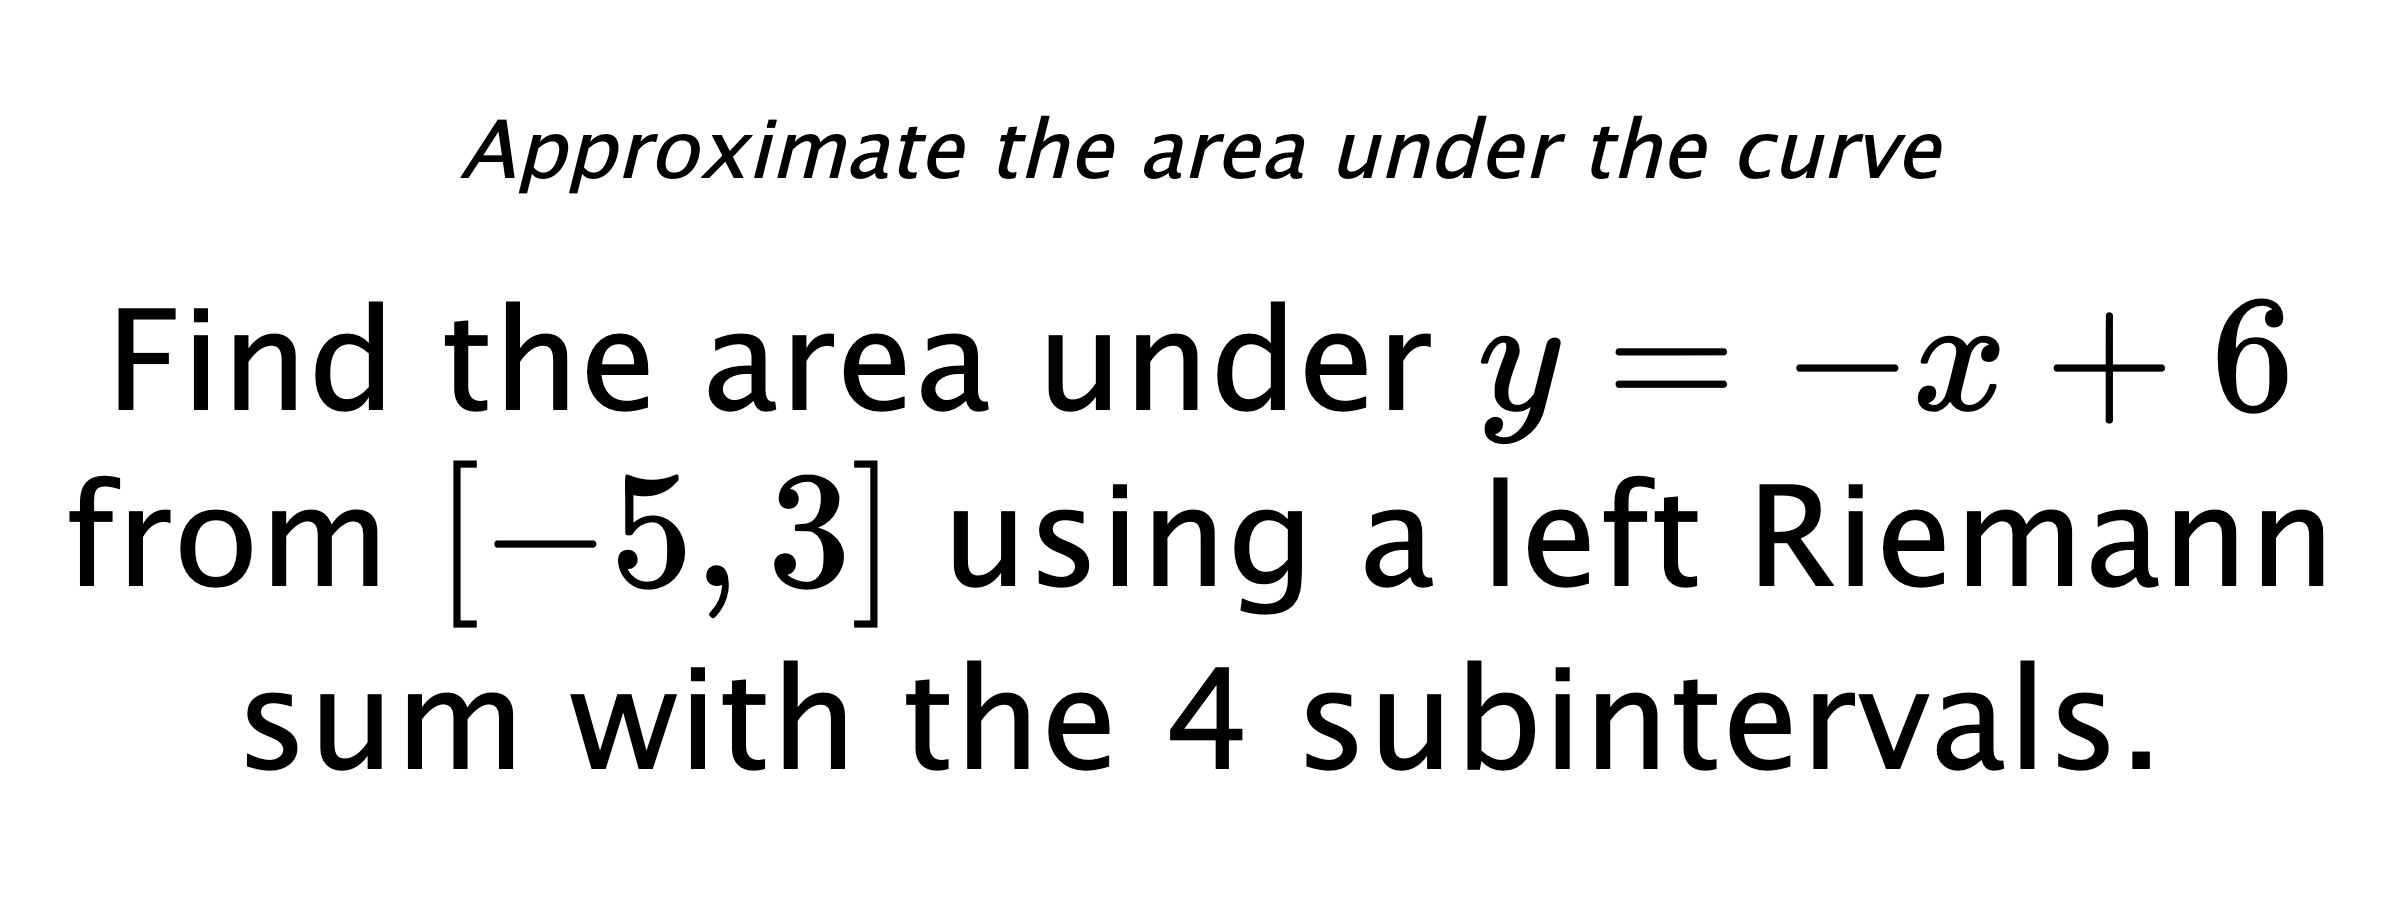 Approximate the area under the curve Find the area under $ y=-x+6 $ from $ [-5,3] $ using a left Riemann sum with the 4 subintervals.